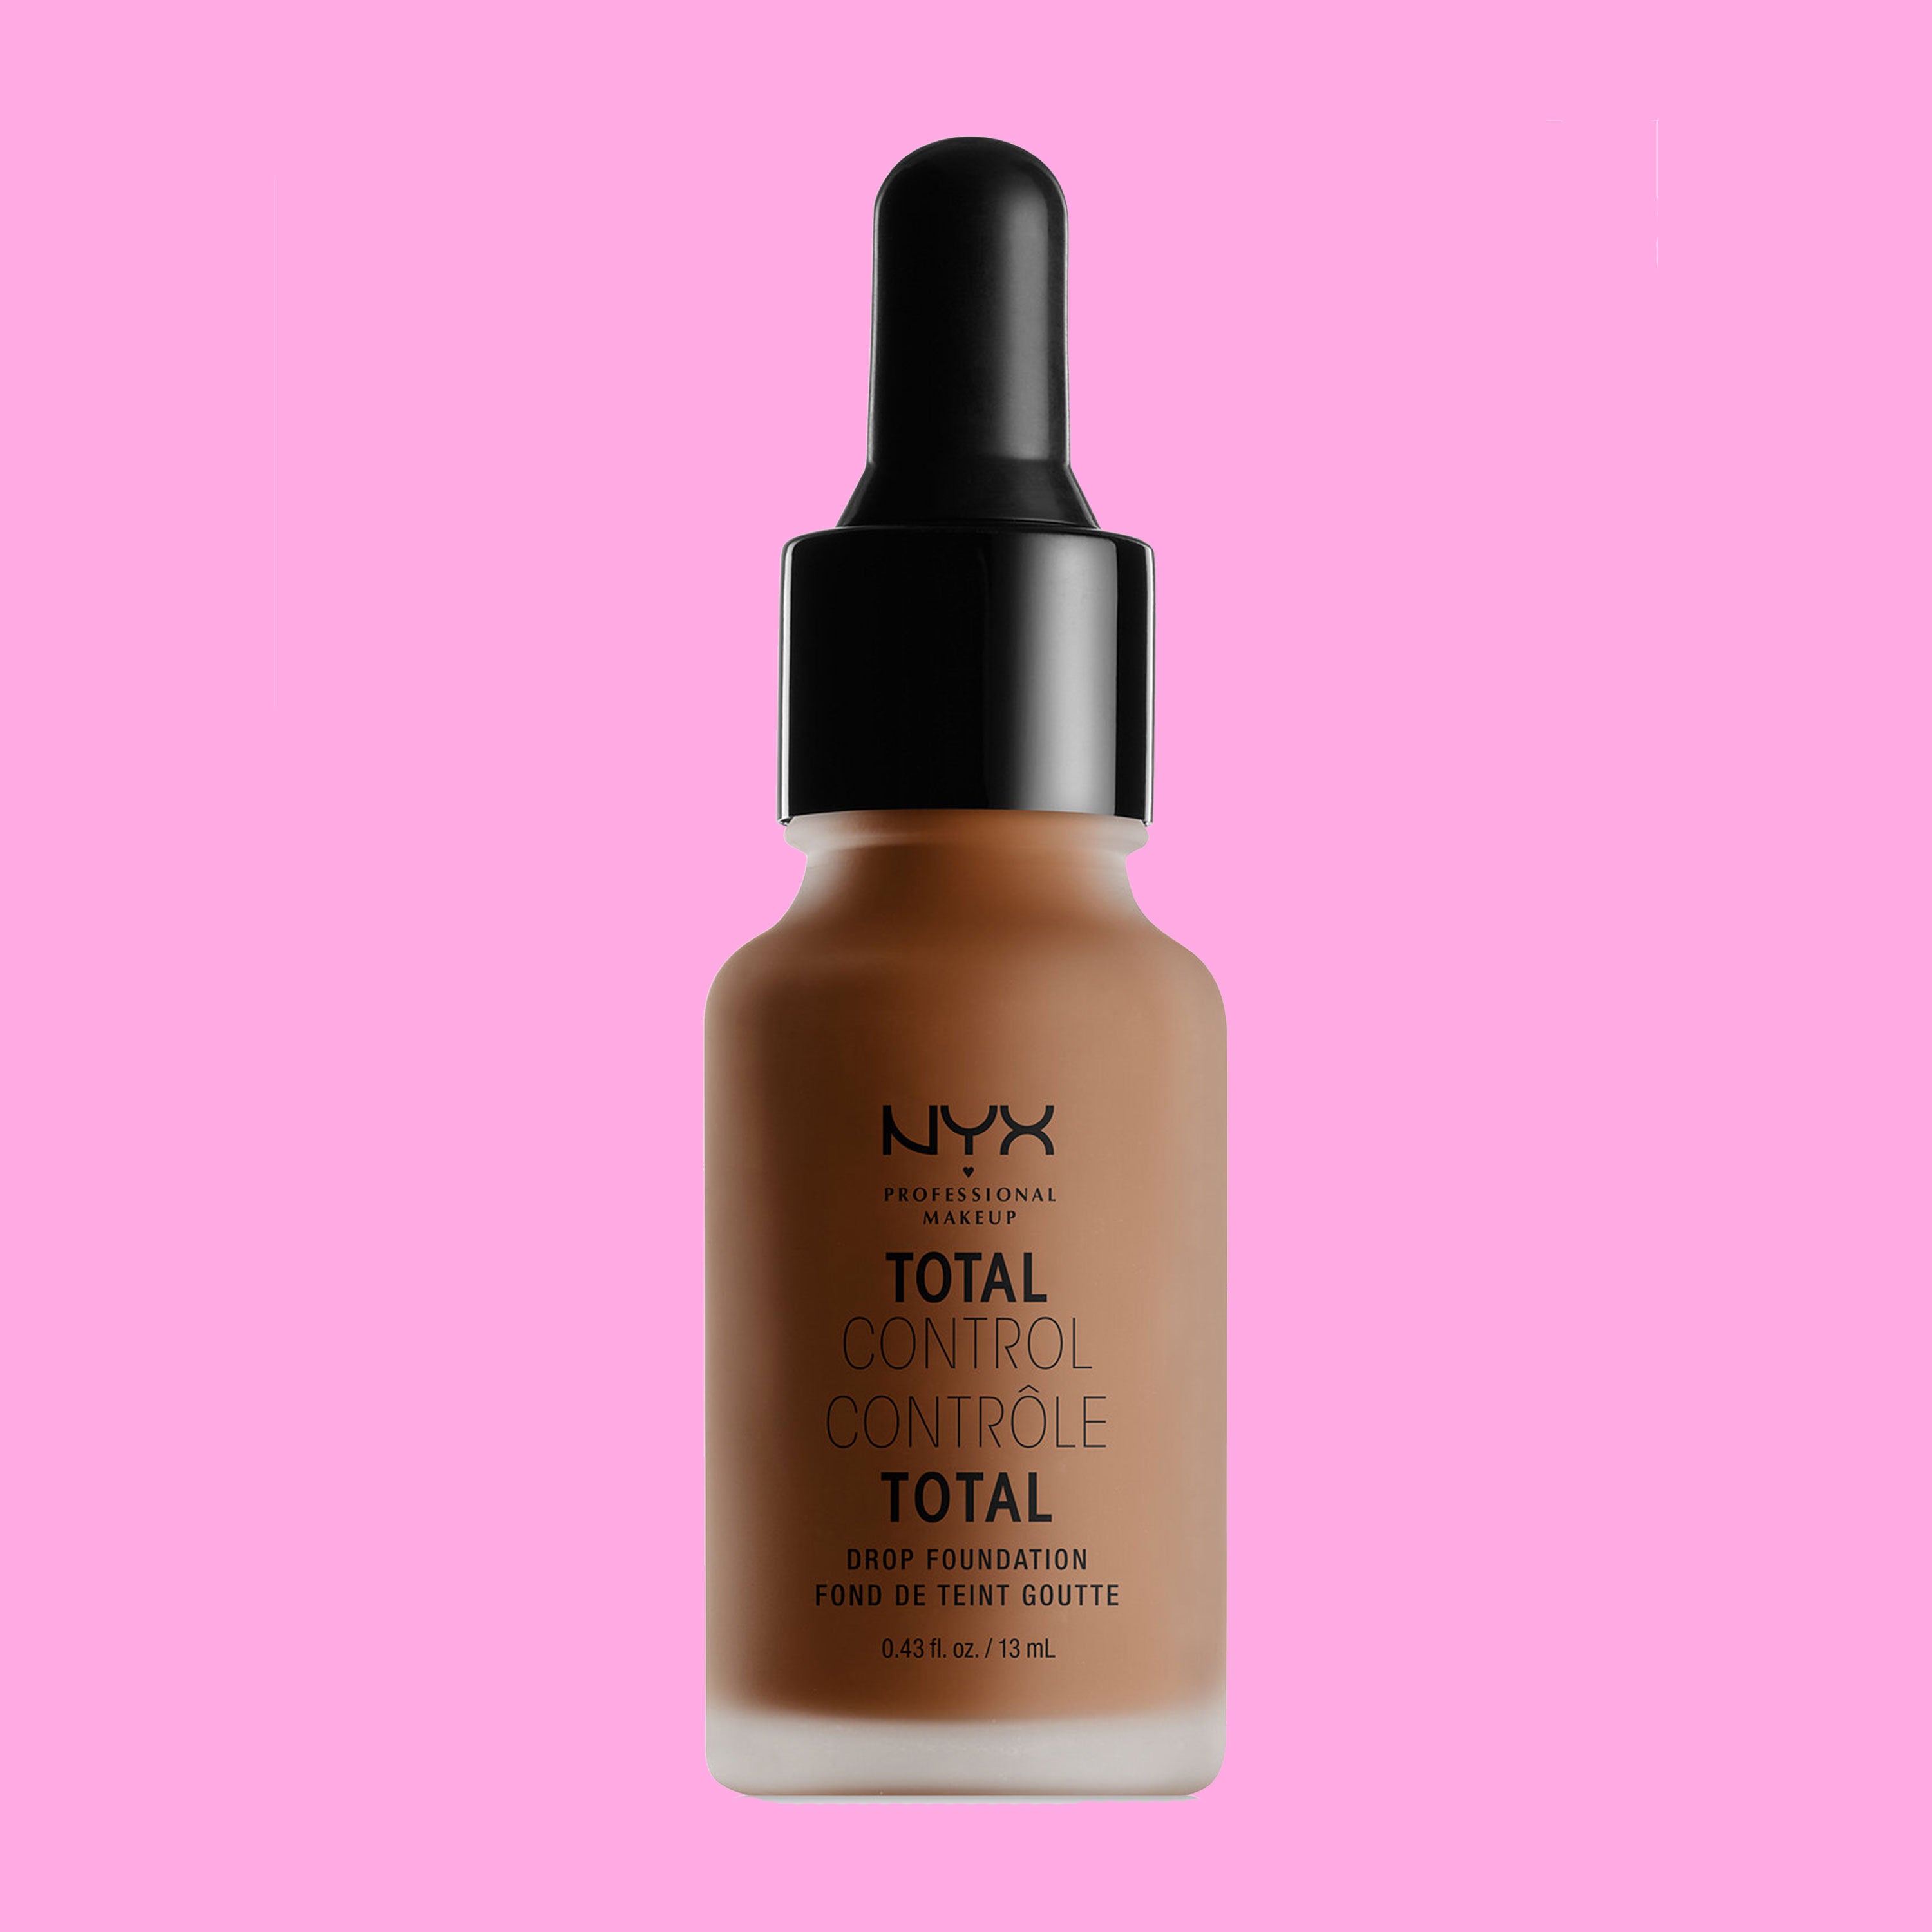 7 Foundations That Cover Dark Spots Like A Boss